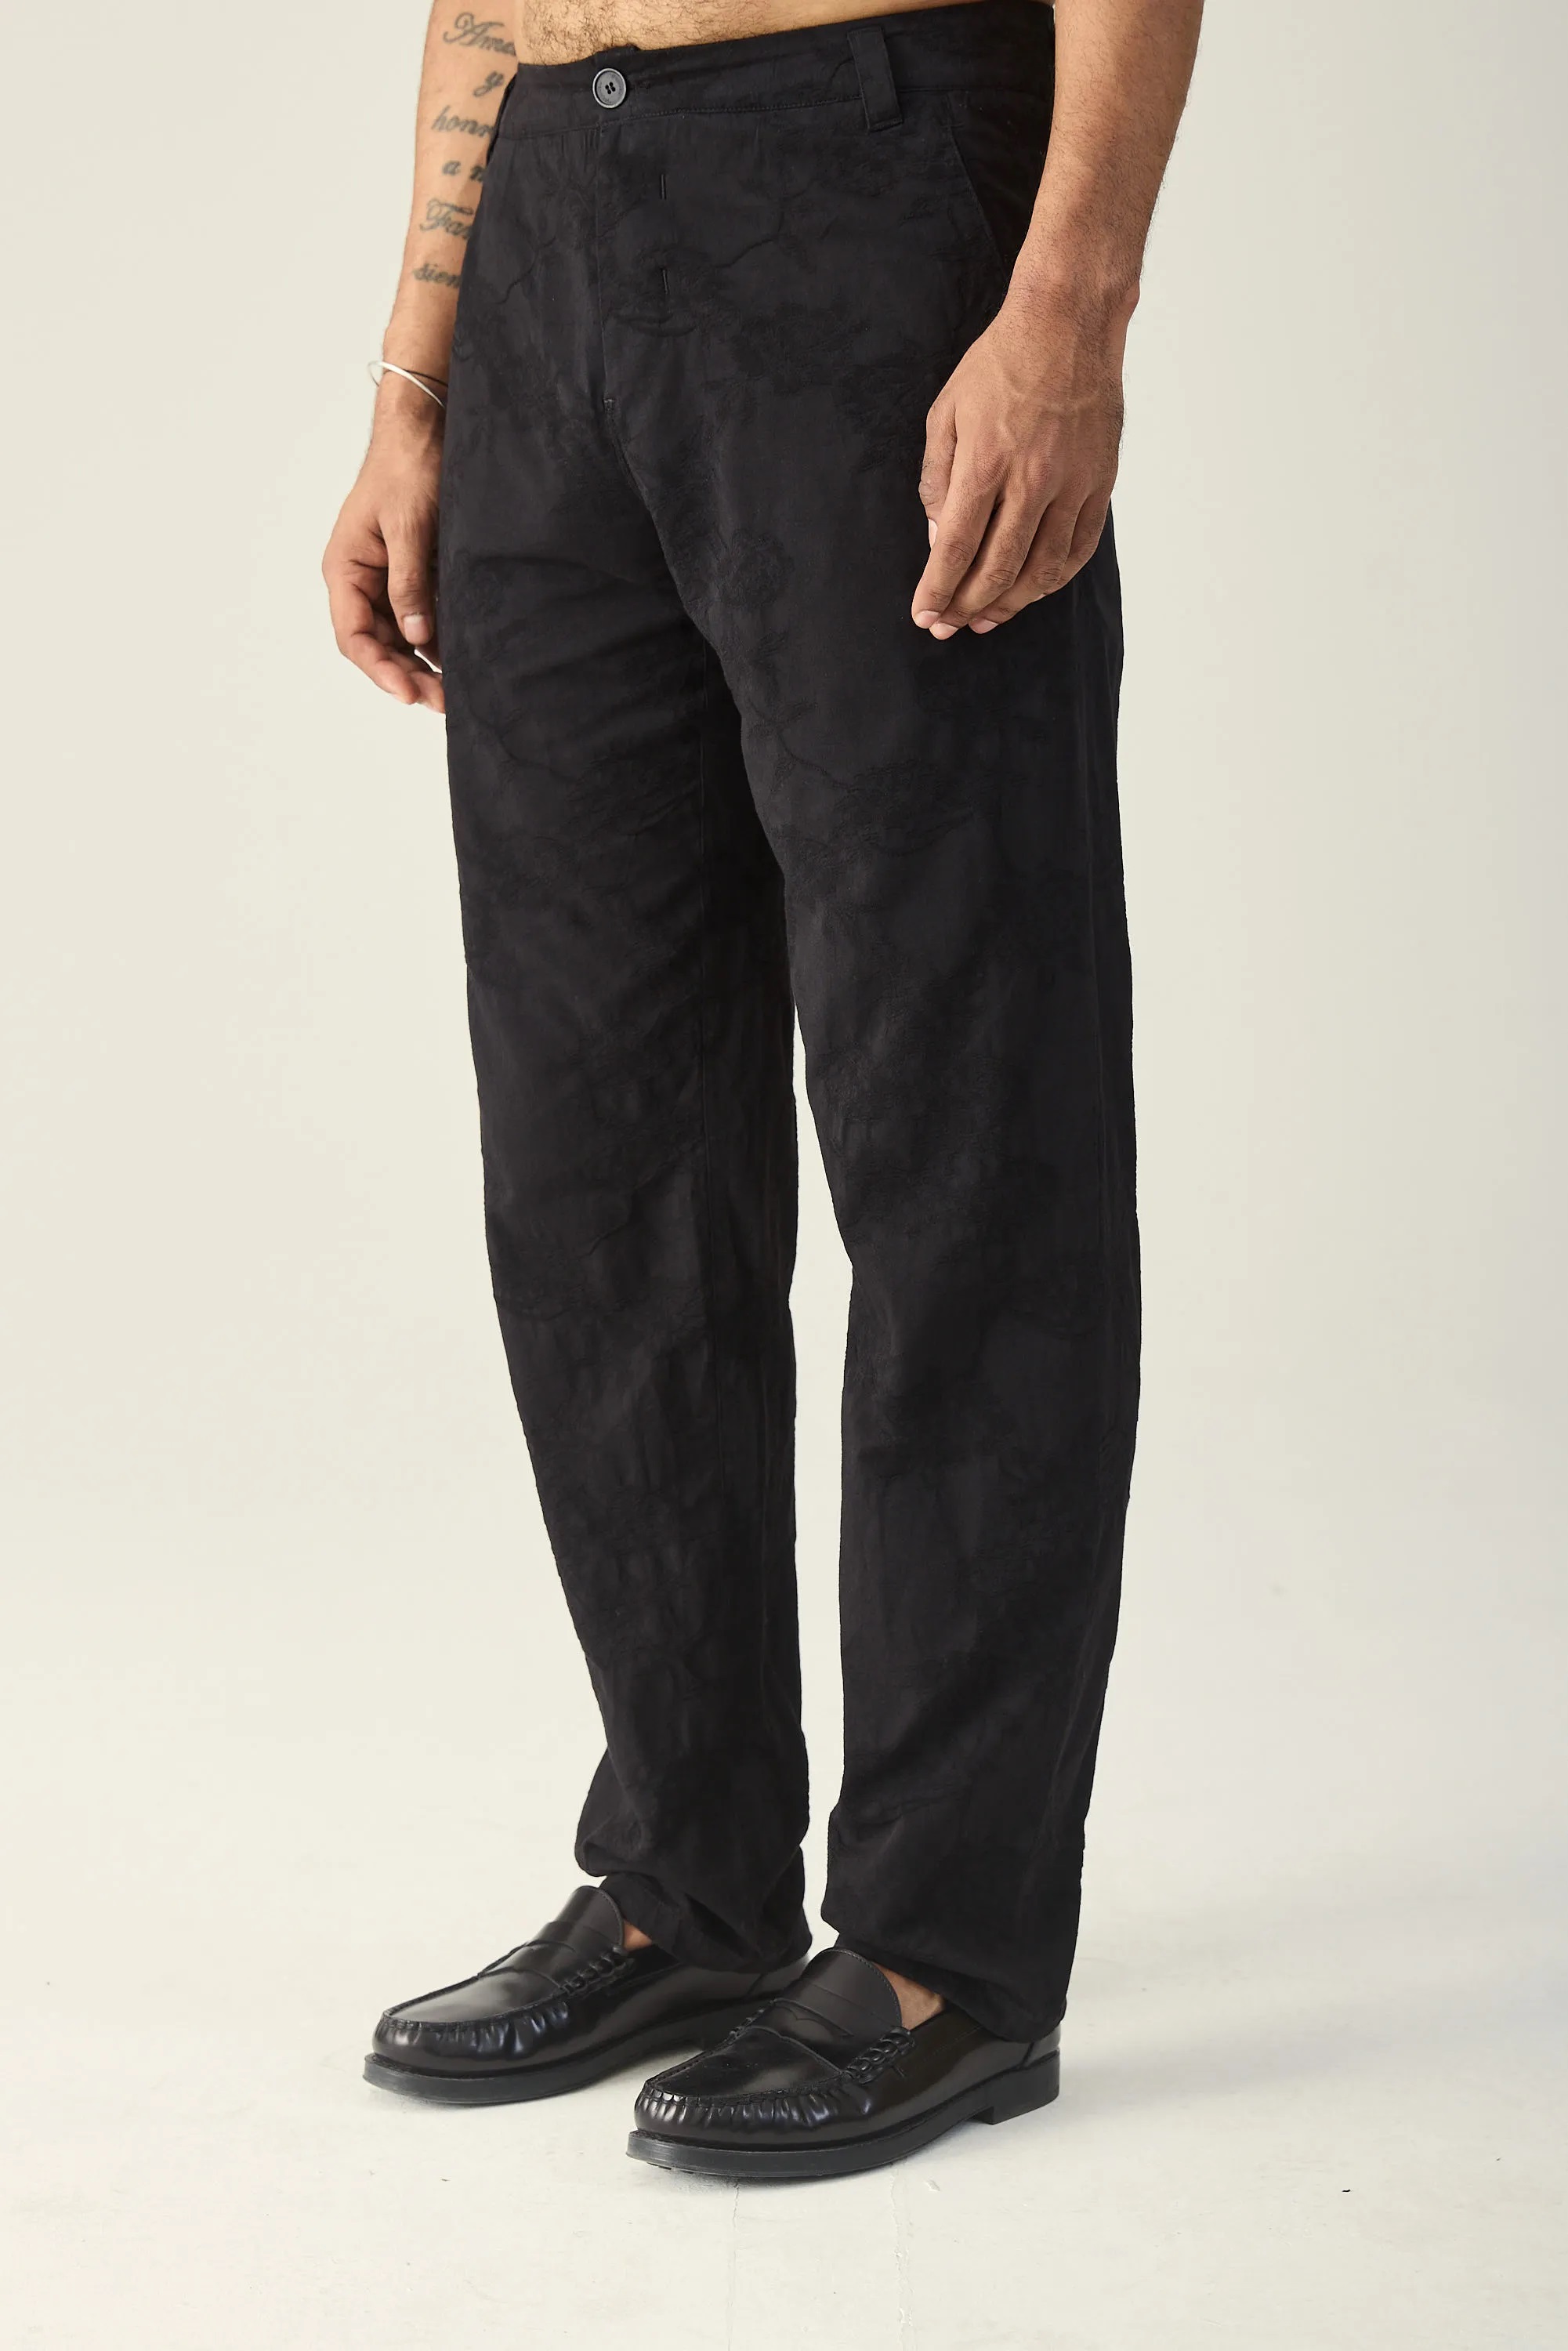 HANNIBAL. Embroidered Trouser Hannes in Black 48